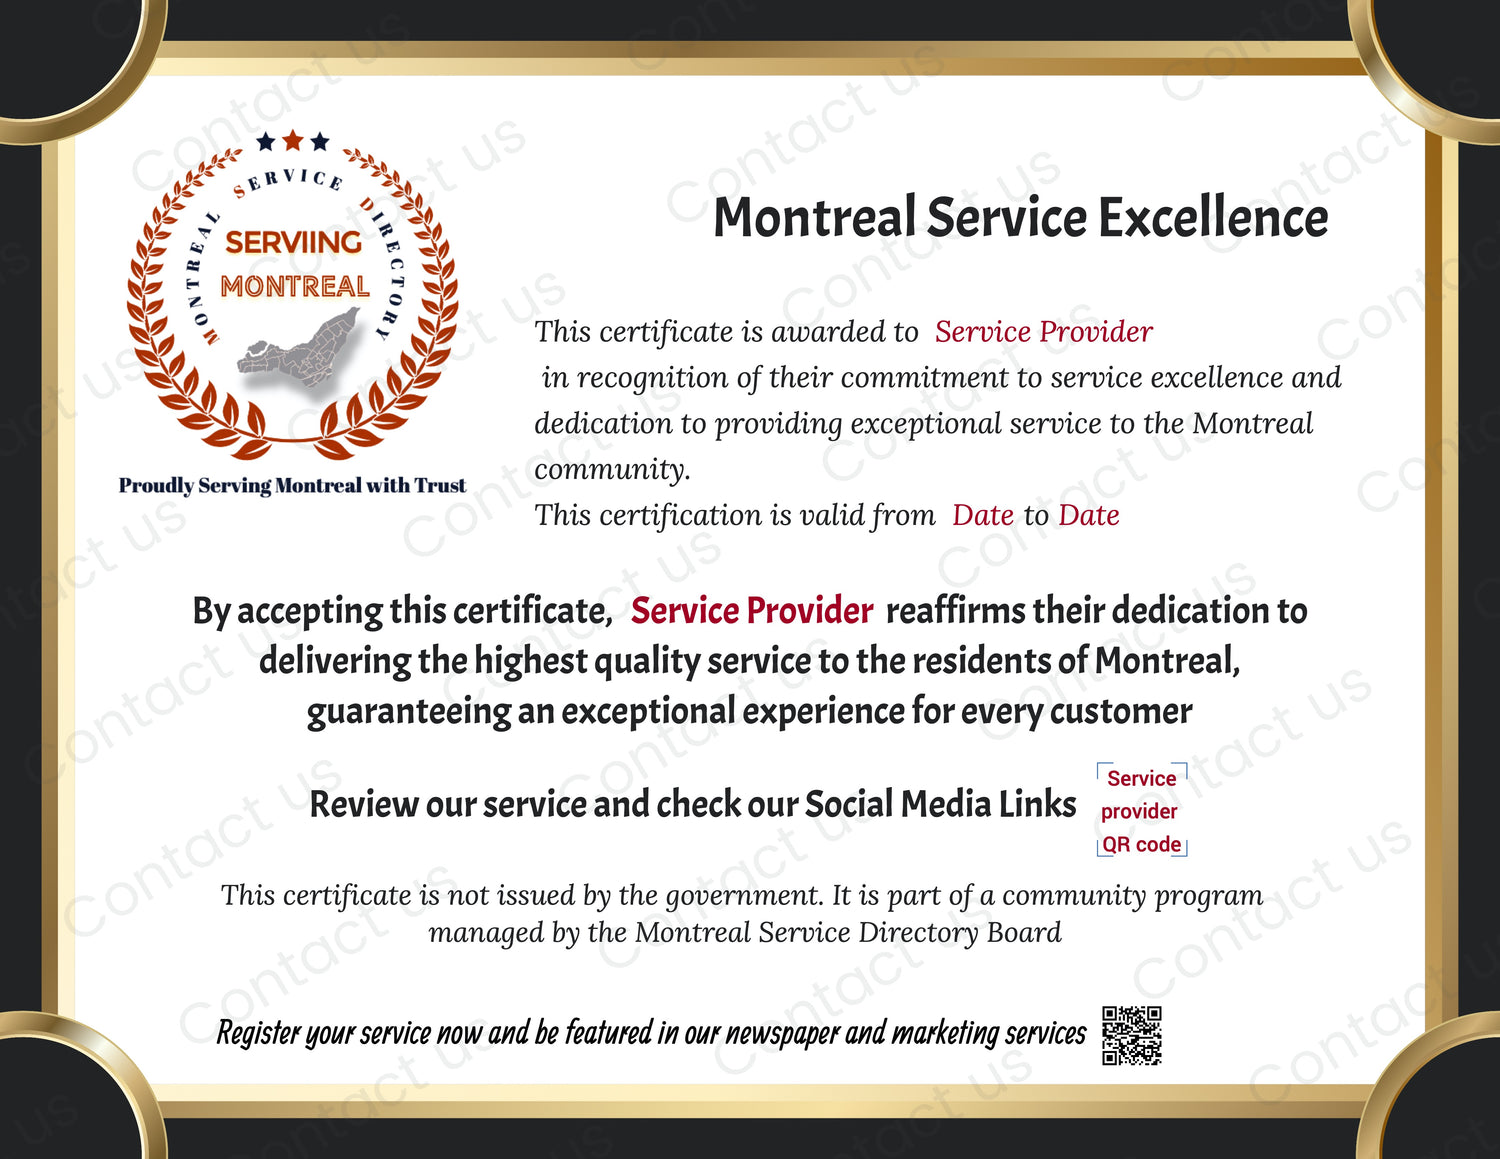 Ready to Serve Montreal Better?